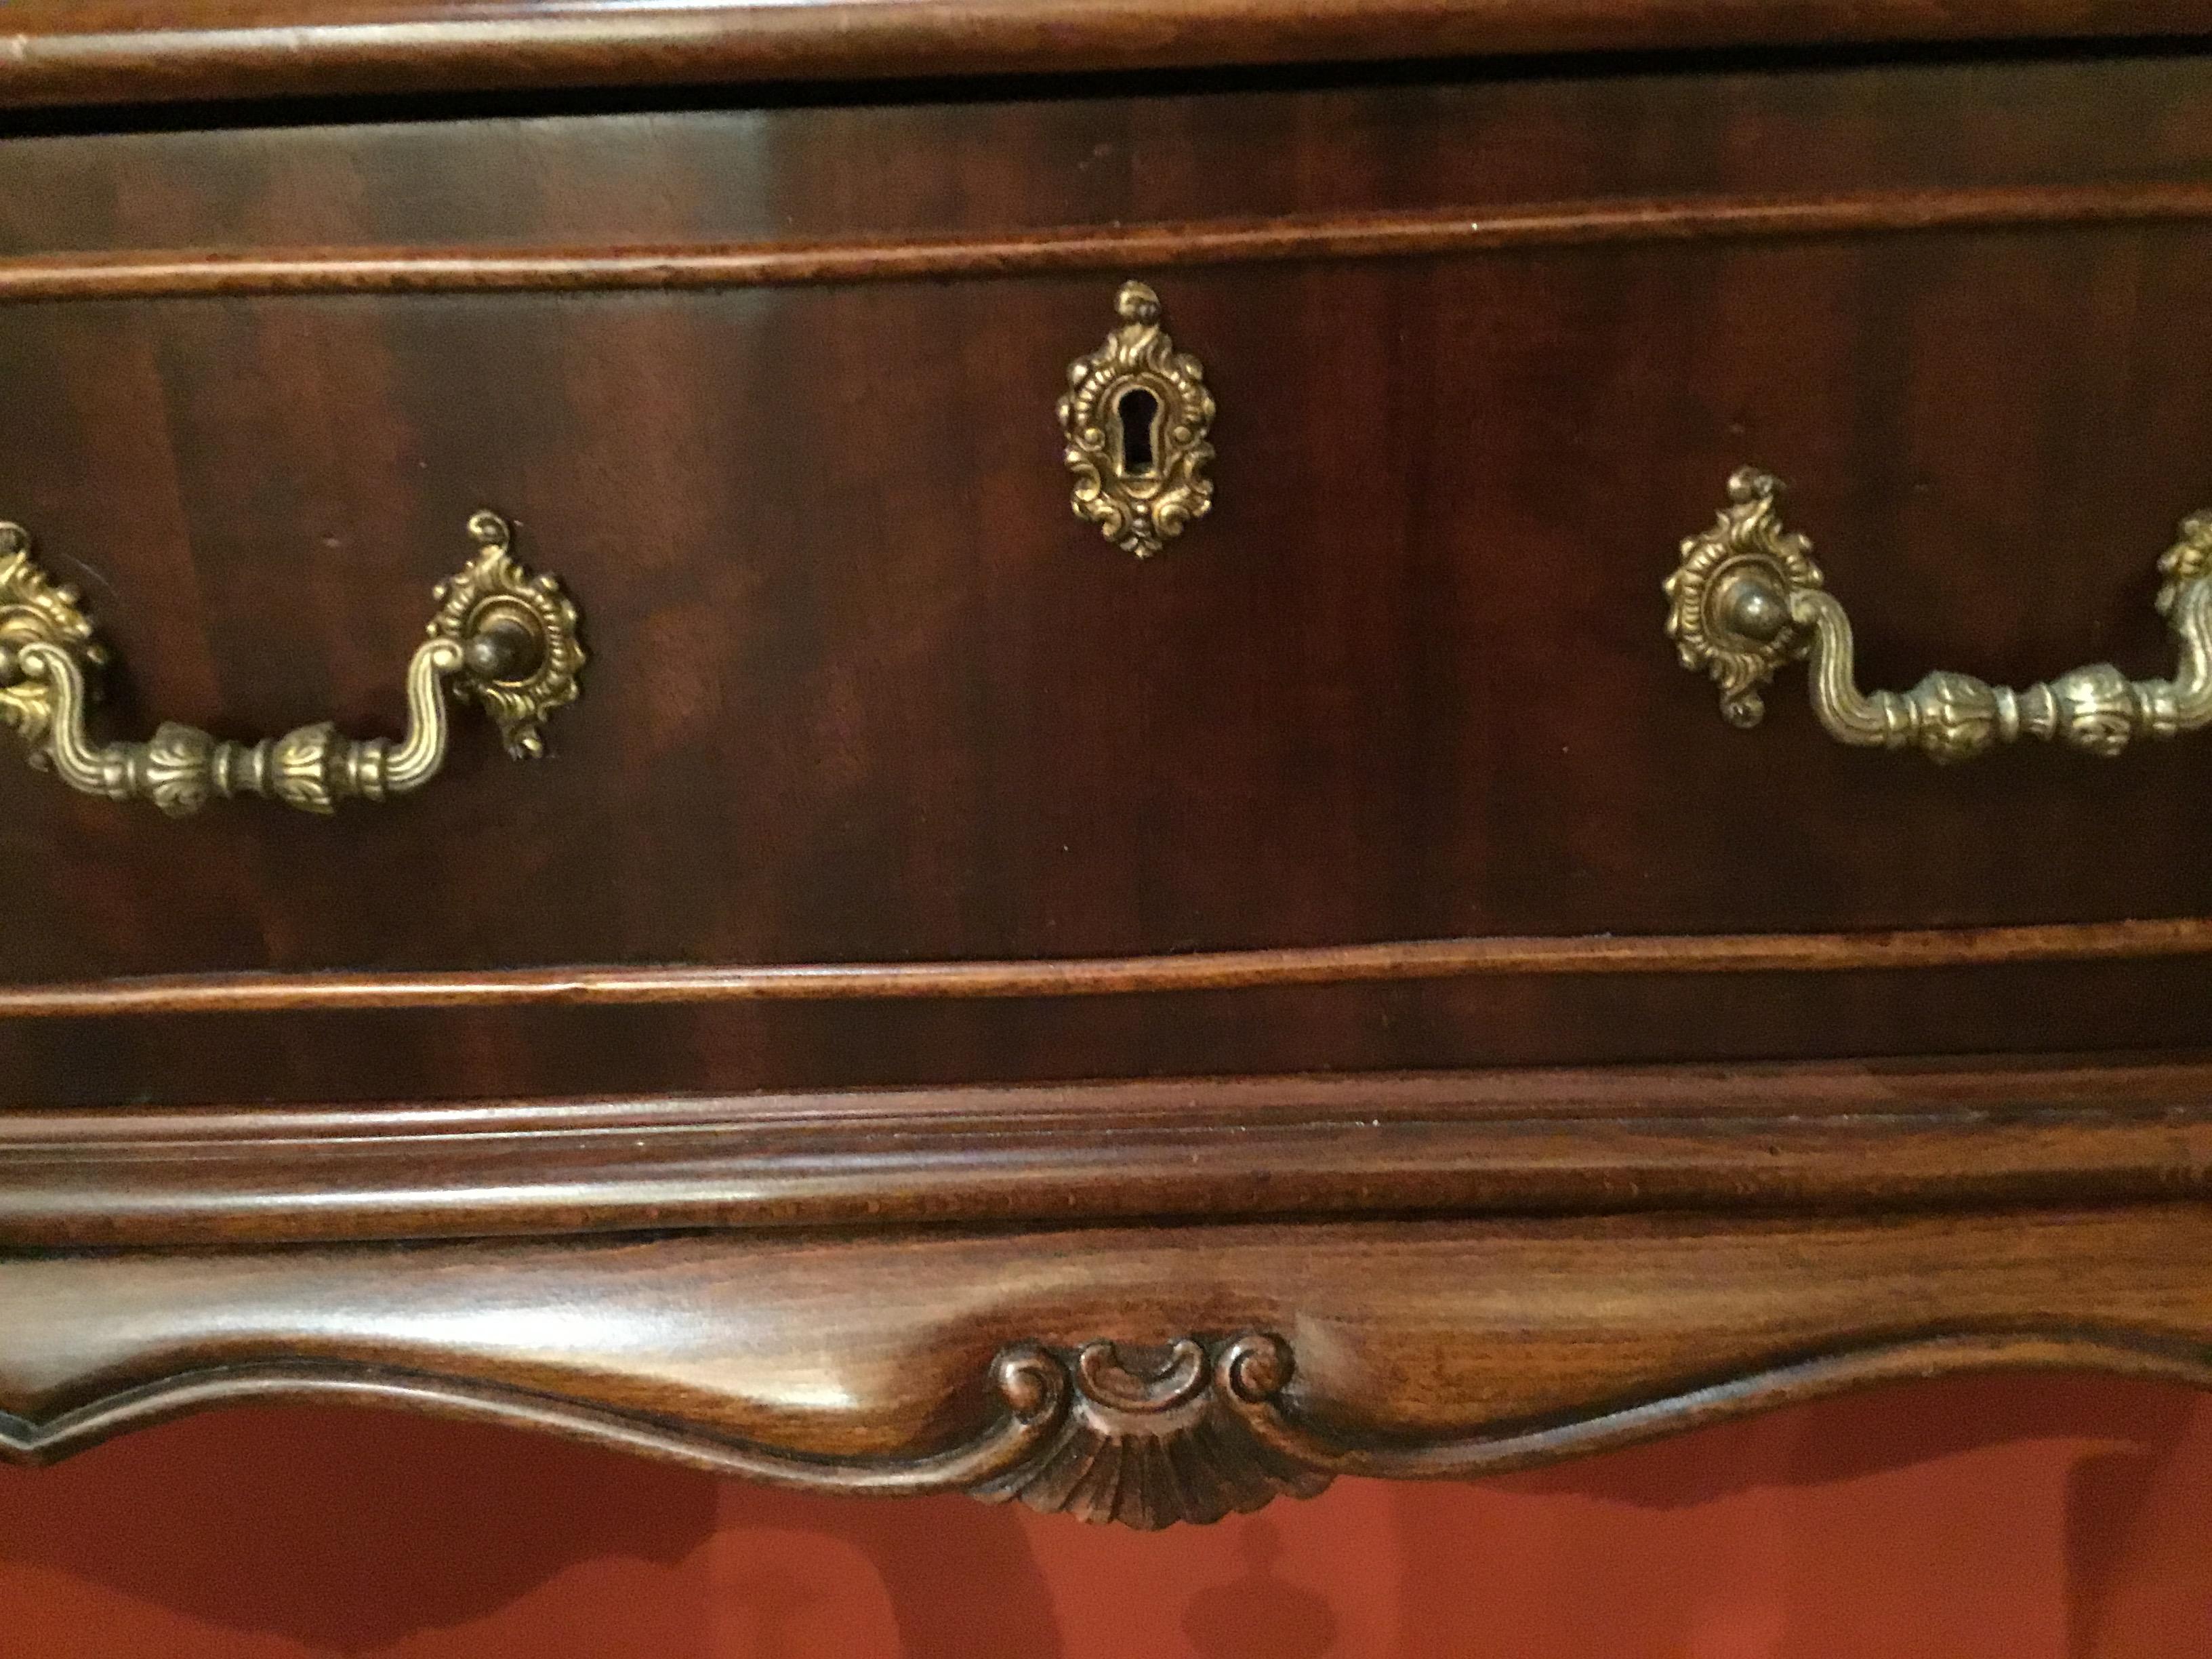 Handsome walnut console with three drawers that are dove tailed and is a solid piece with
Lovely wood and very good construction. The front is of serpentine shape and curved on
The sides. The legs are gracefully curved and end in a Queen Anne